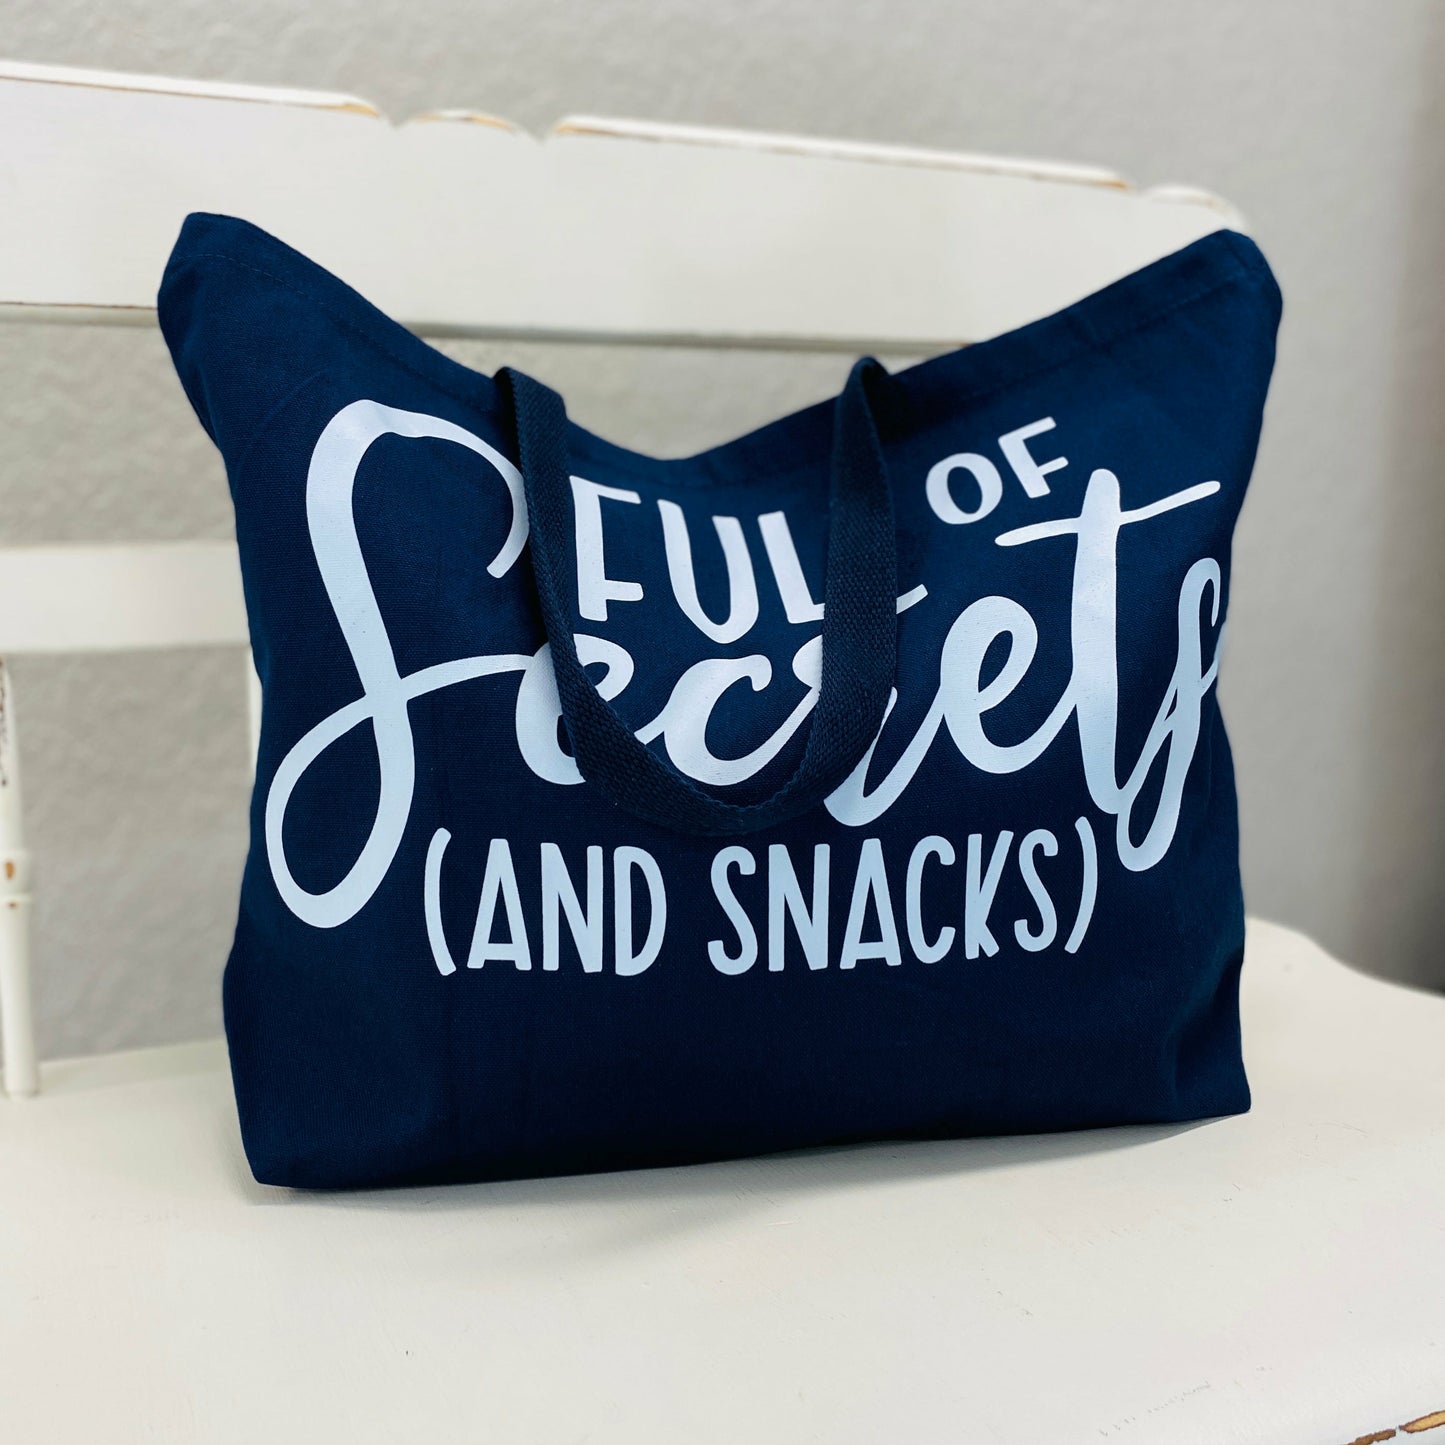 Full Of Secrets Navy Bag  As Damian once said "that's why her hair is so big, it's full of secrets". If you're a mean girls kinda person you HAVE to get this bag. Very spacious so you have plenty of room for snacks and secrets.  %100 cotton  Tea Shirt shoppe 417-262-8828